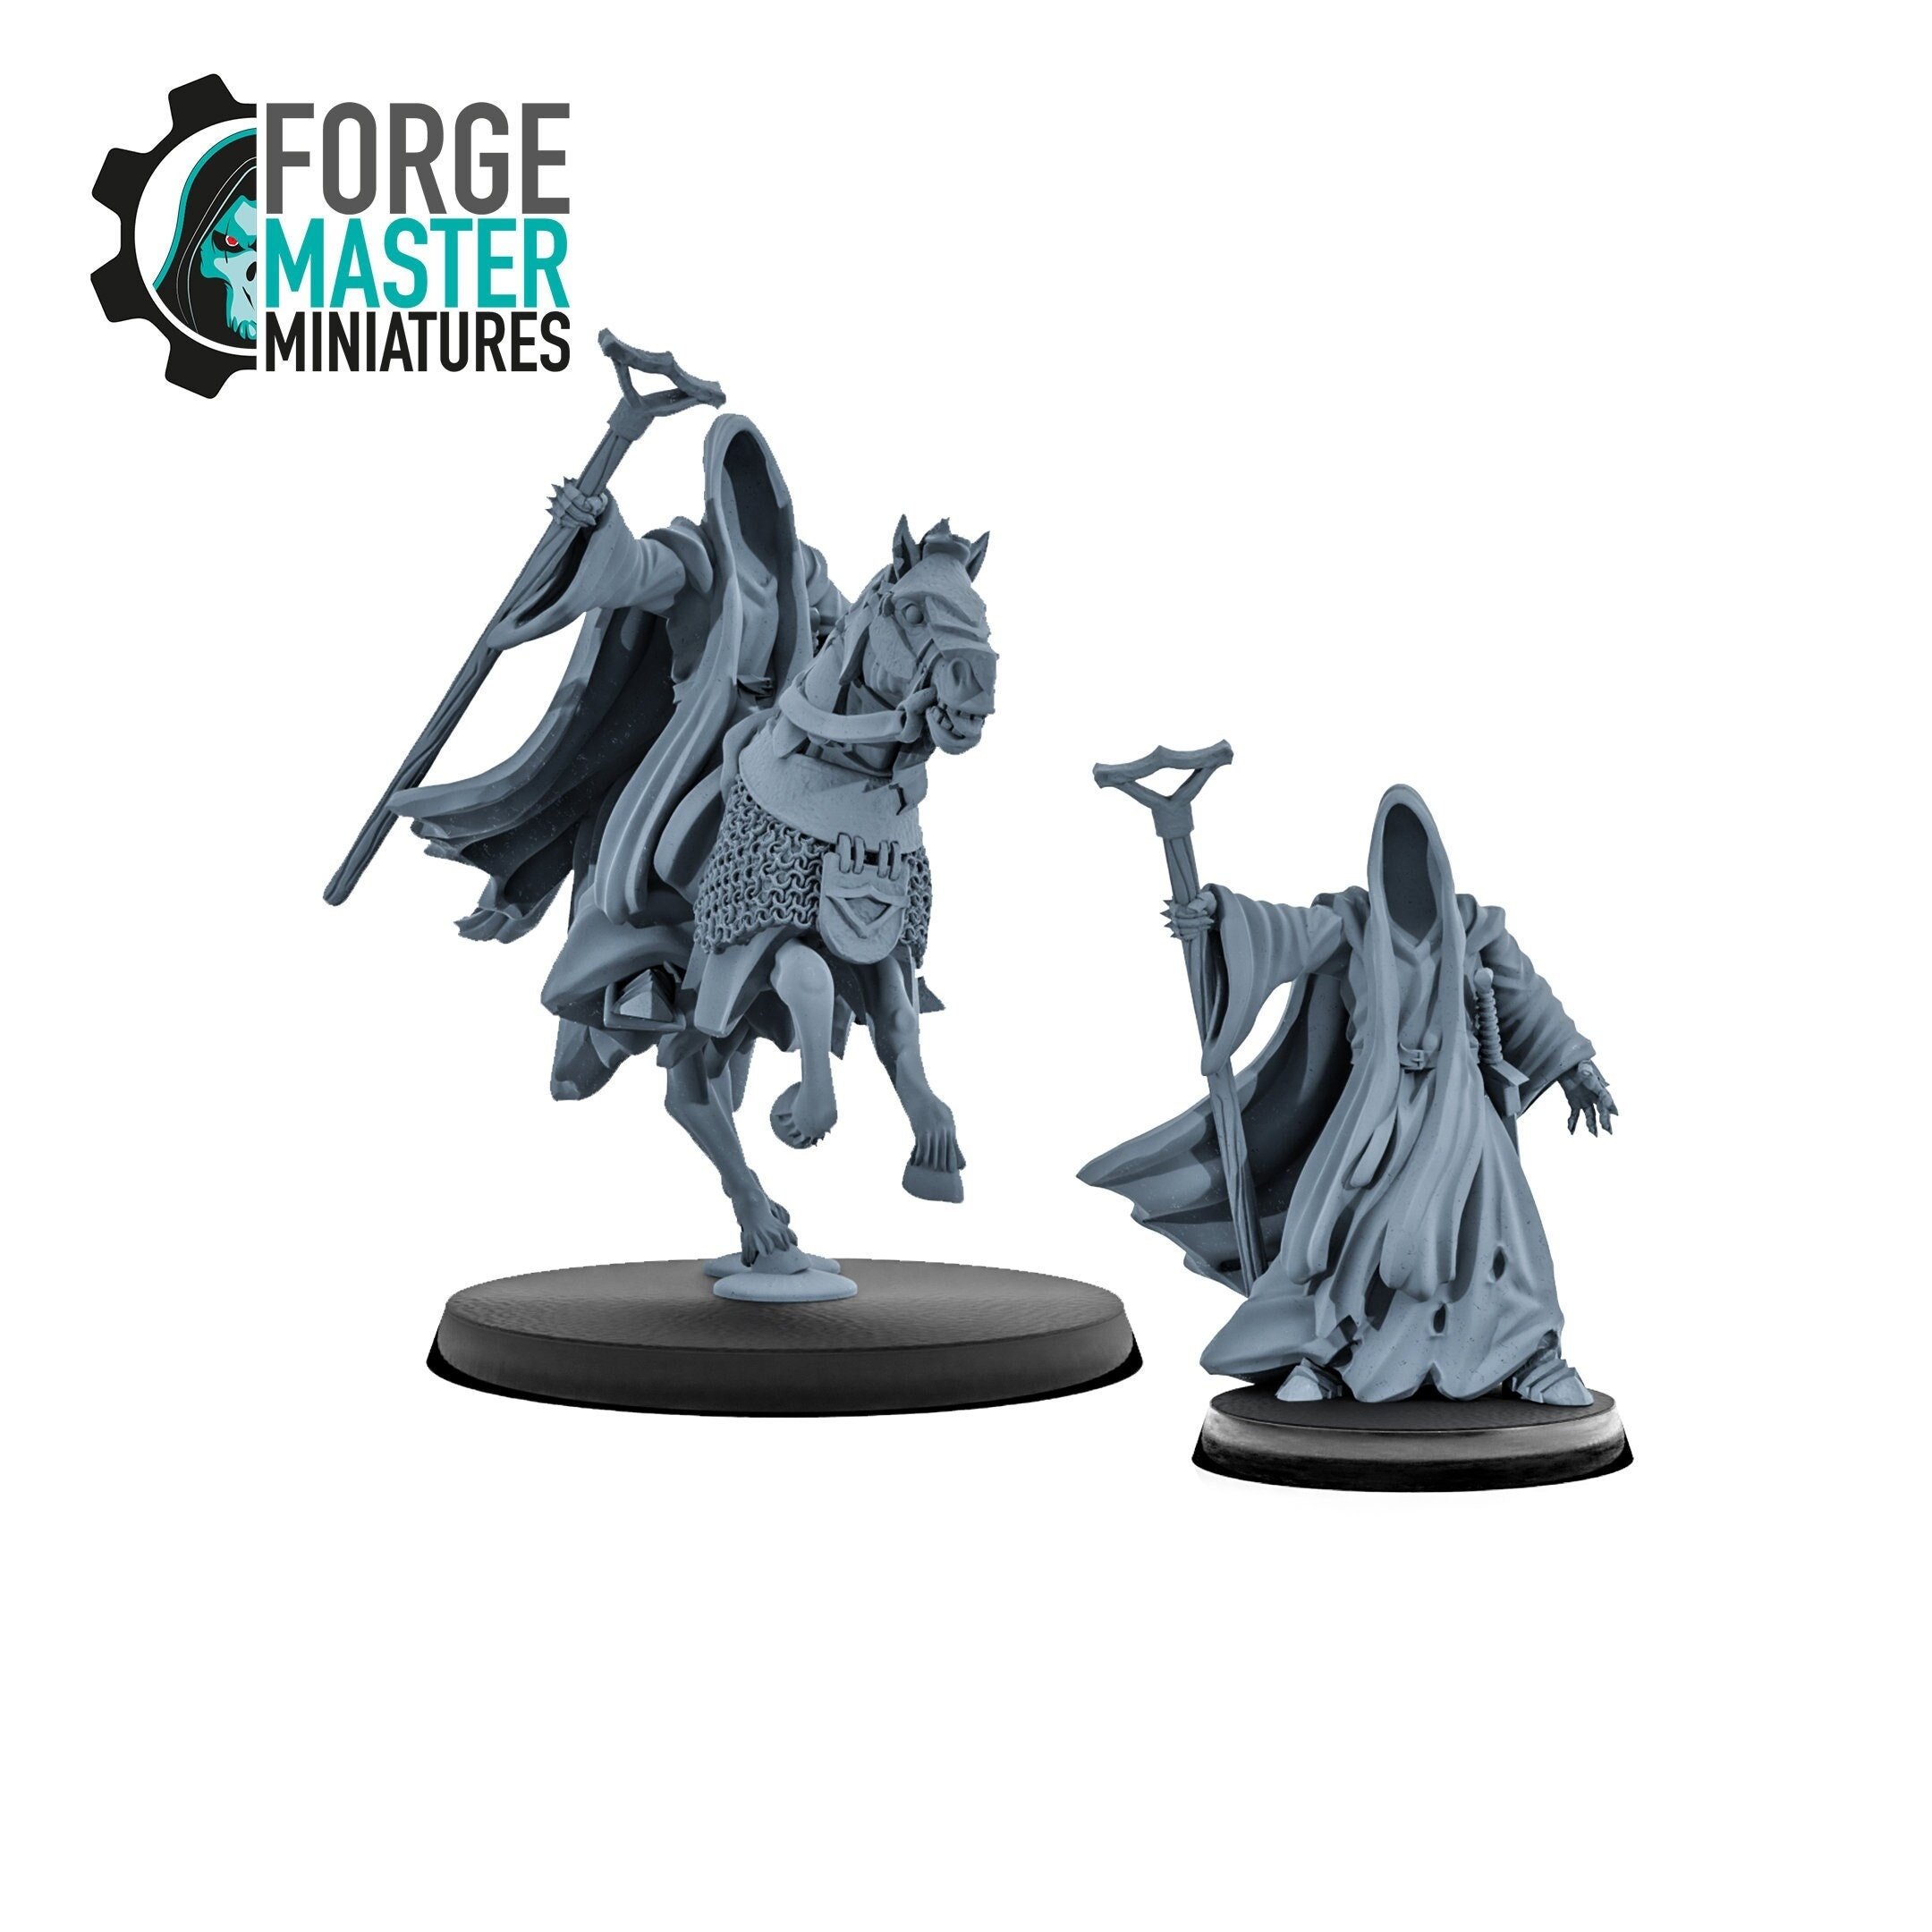 Lord of Mischief wargaming miniatures by Kzk Minis 3D Printed by Forgemaster Miniatures